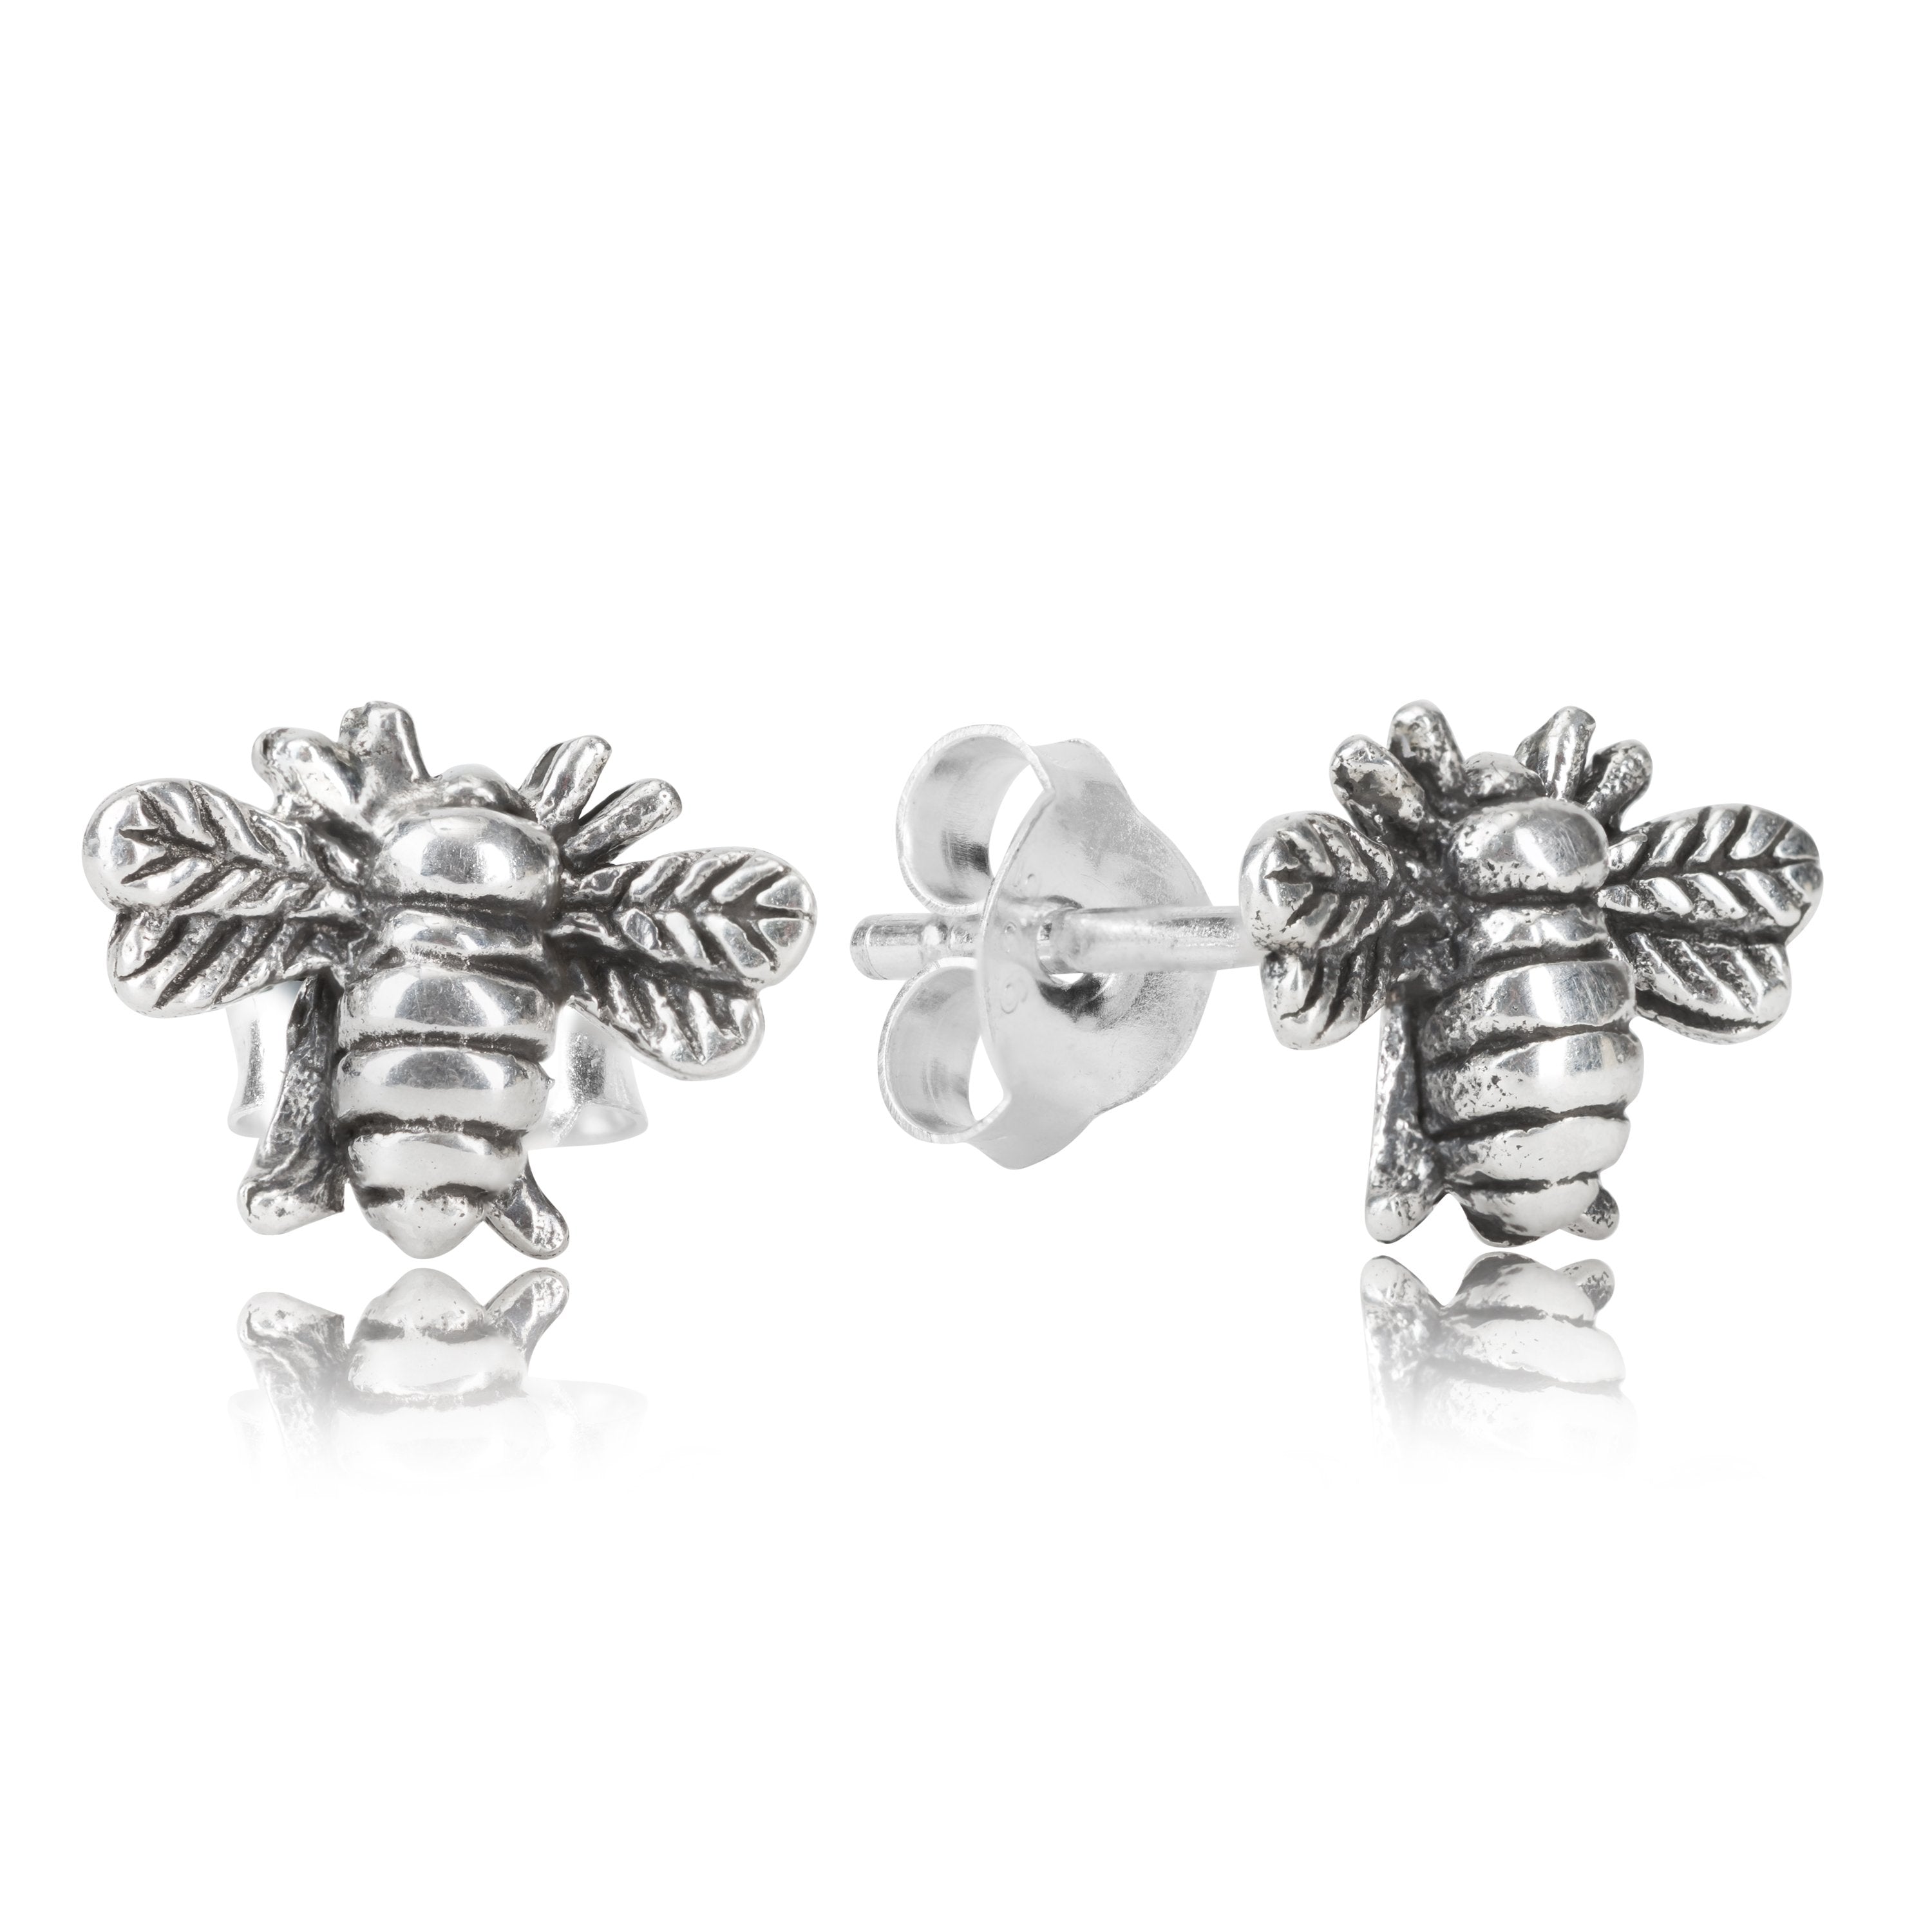 STERLING SILVER BUMBLE BEE STUD EARRING